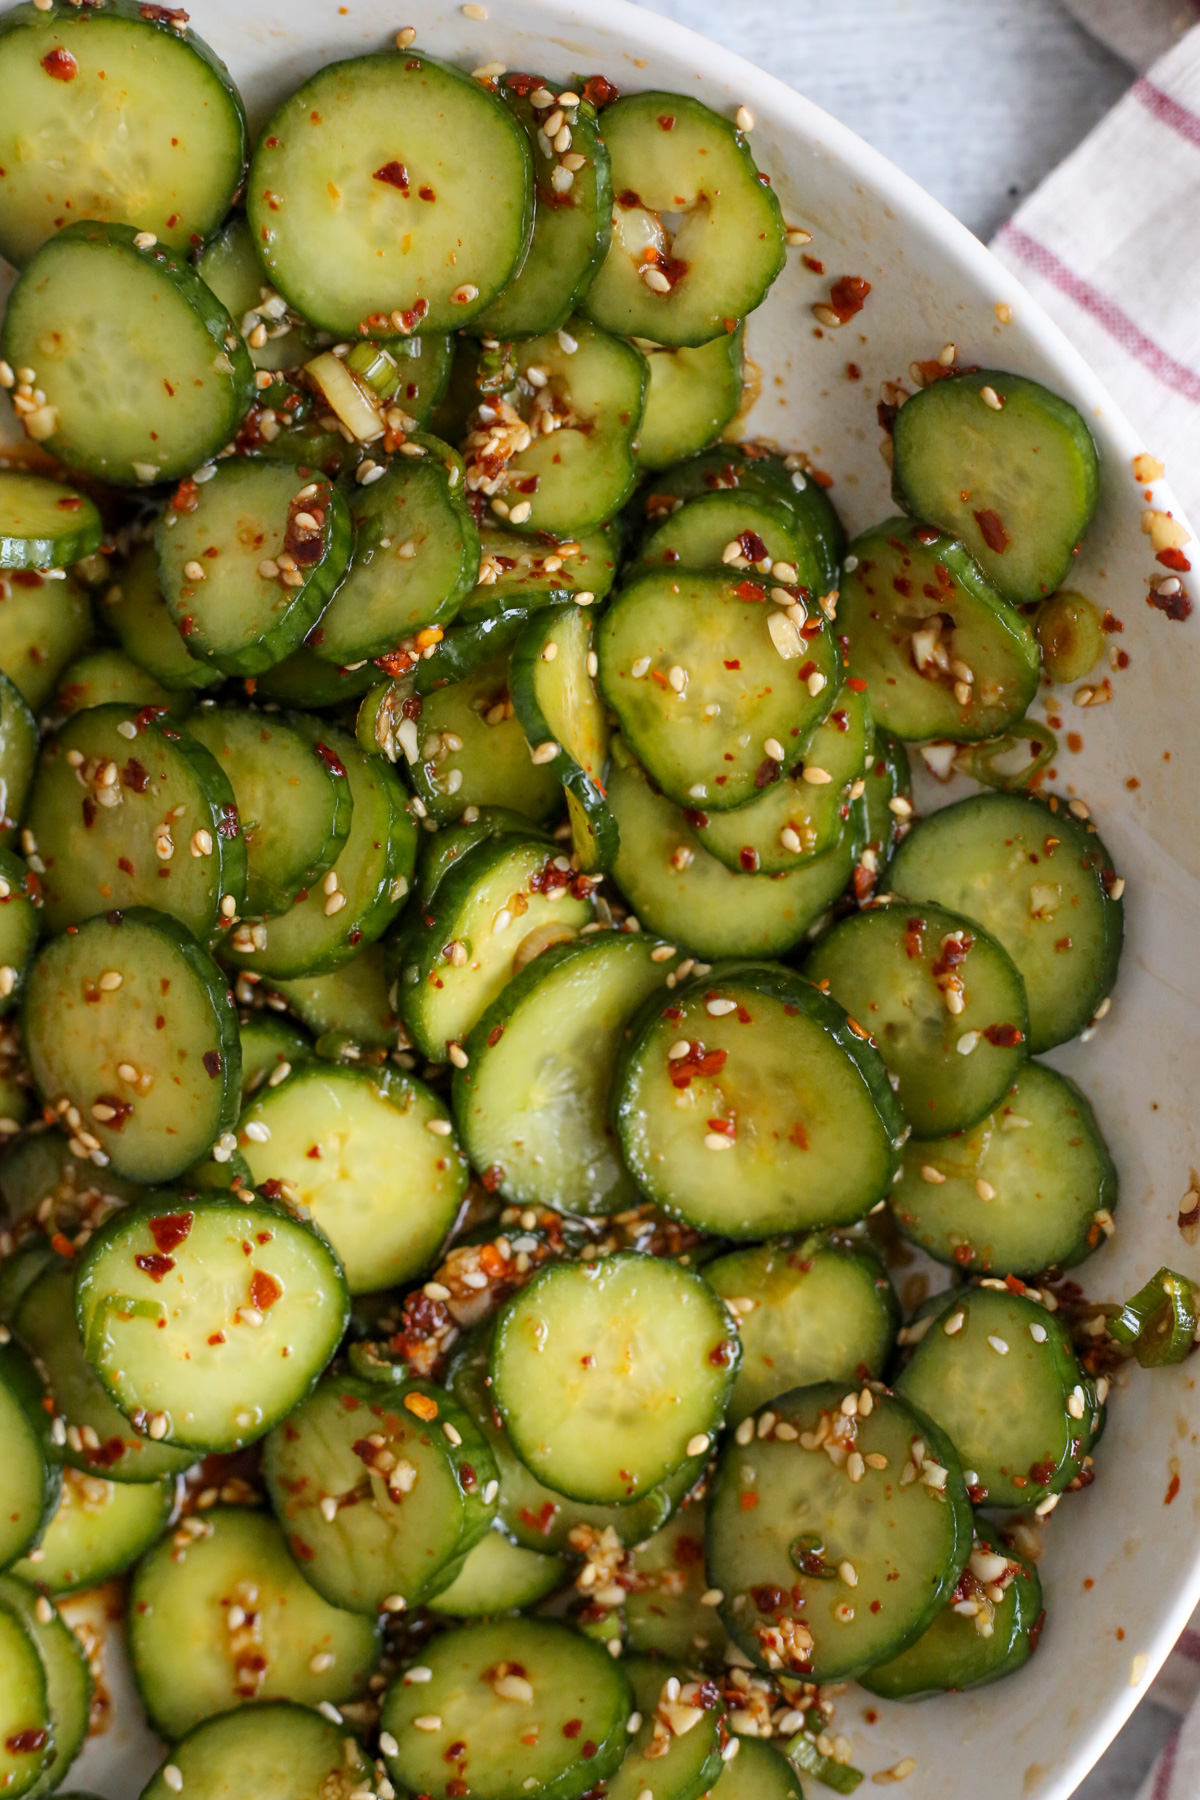 Overhead view of a large serving or mixing bowl filled with sliced cucumbers, seasoned with a light sauce mixture to make oi muchim or spicy Korean cucumber salad